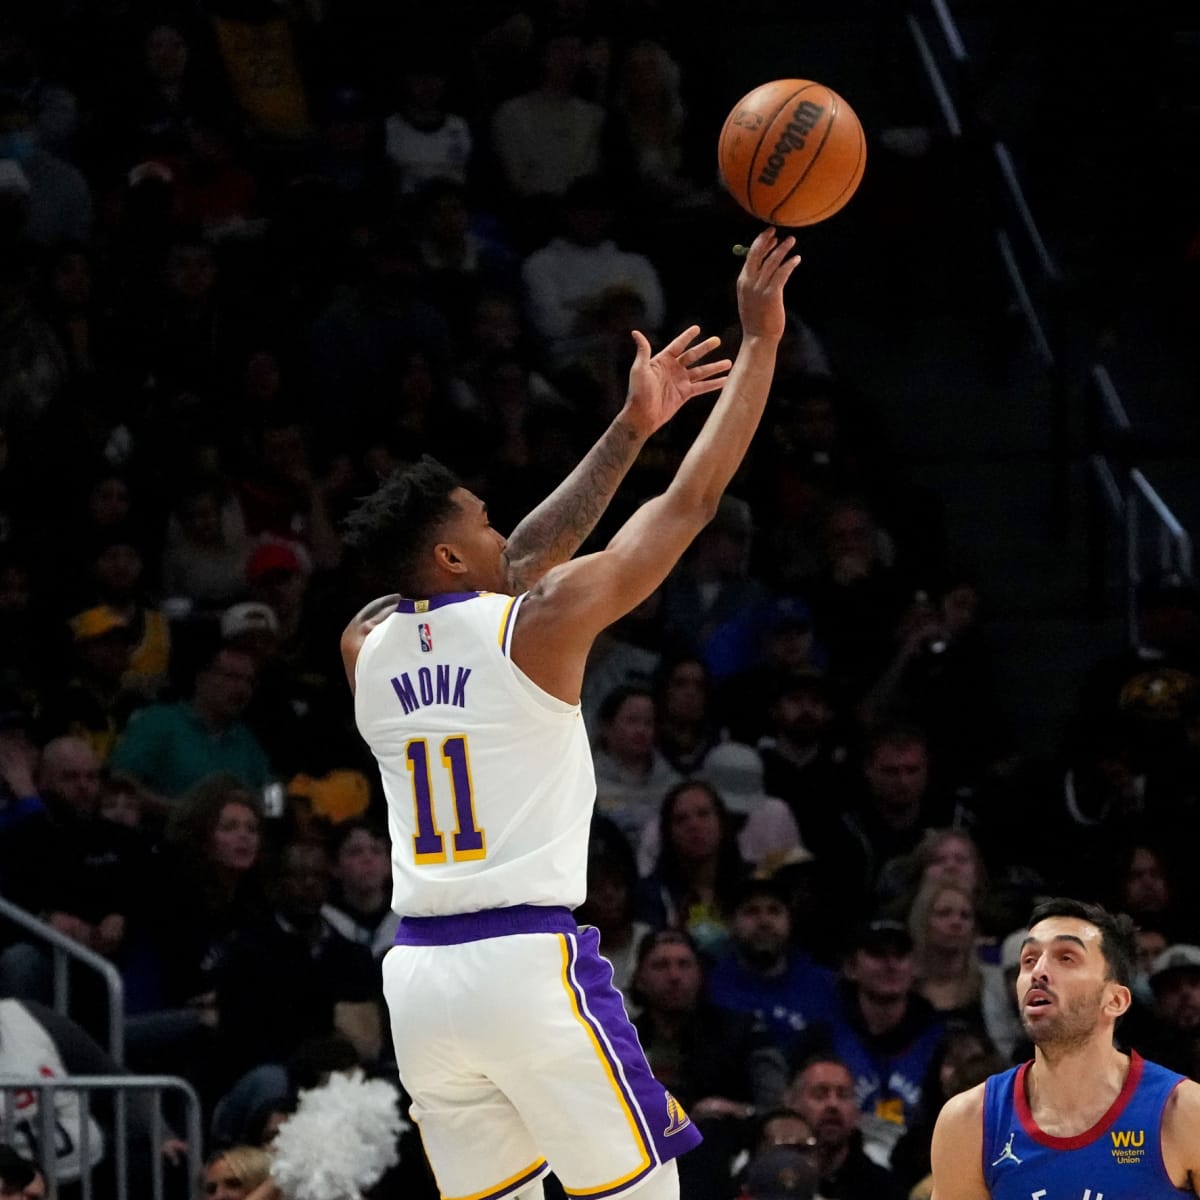 Malik Monk keeps being a bright spot for the Lakers